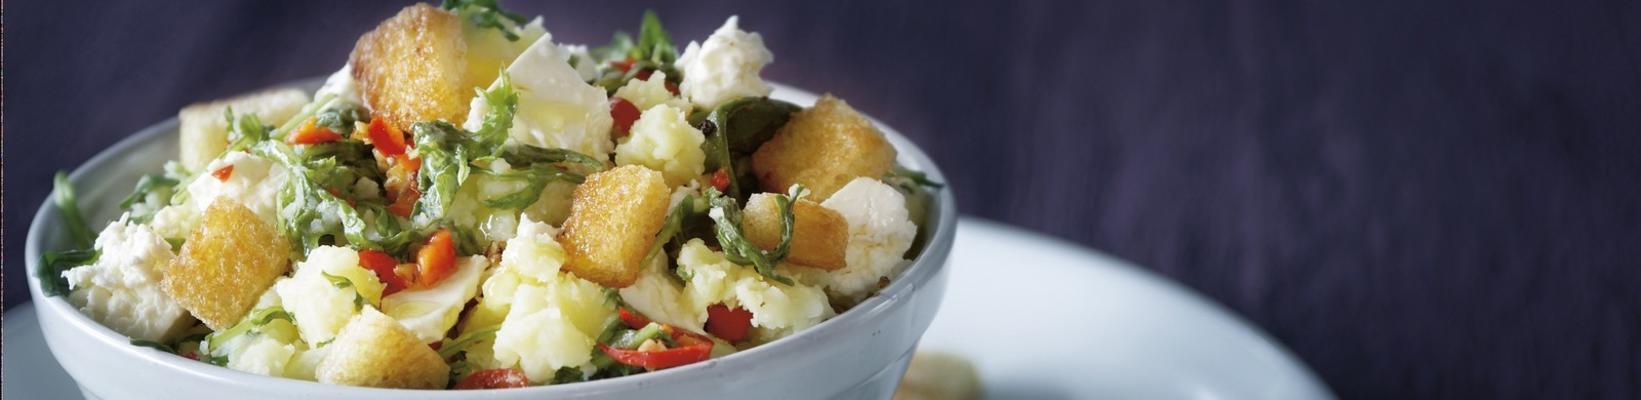 rucola stew with feta and herb croutons